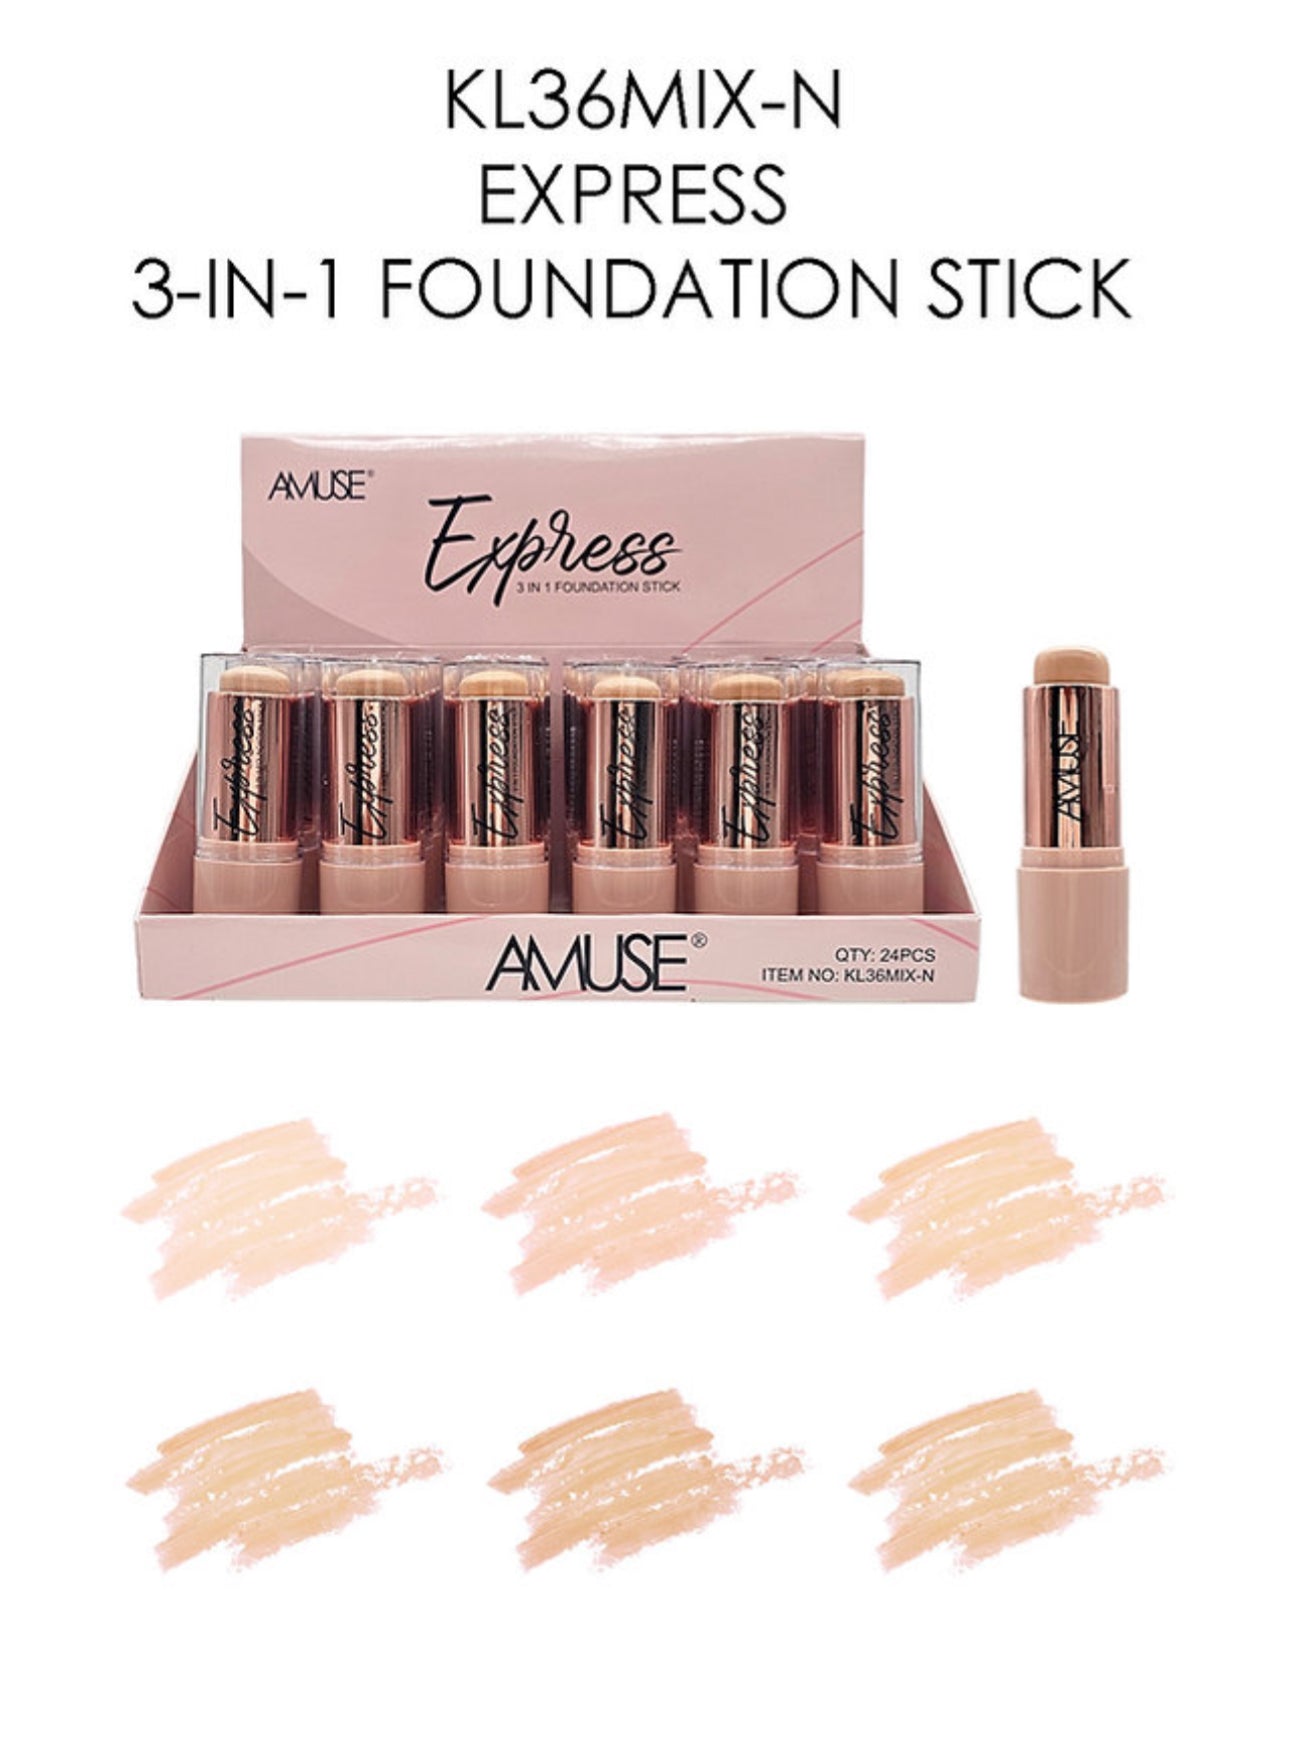 Amuse - Express 3 in 1 Foundation